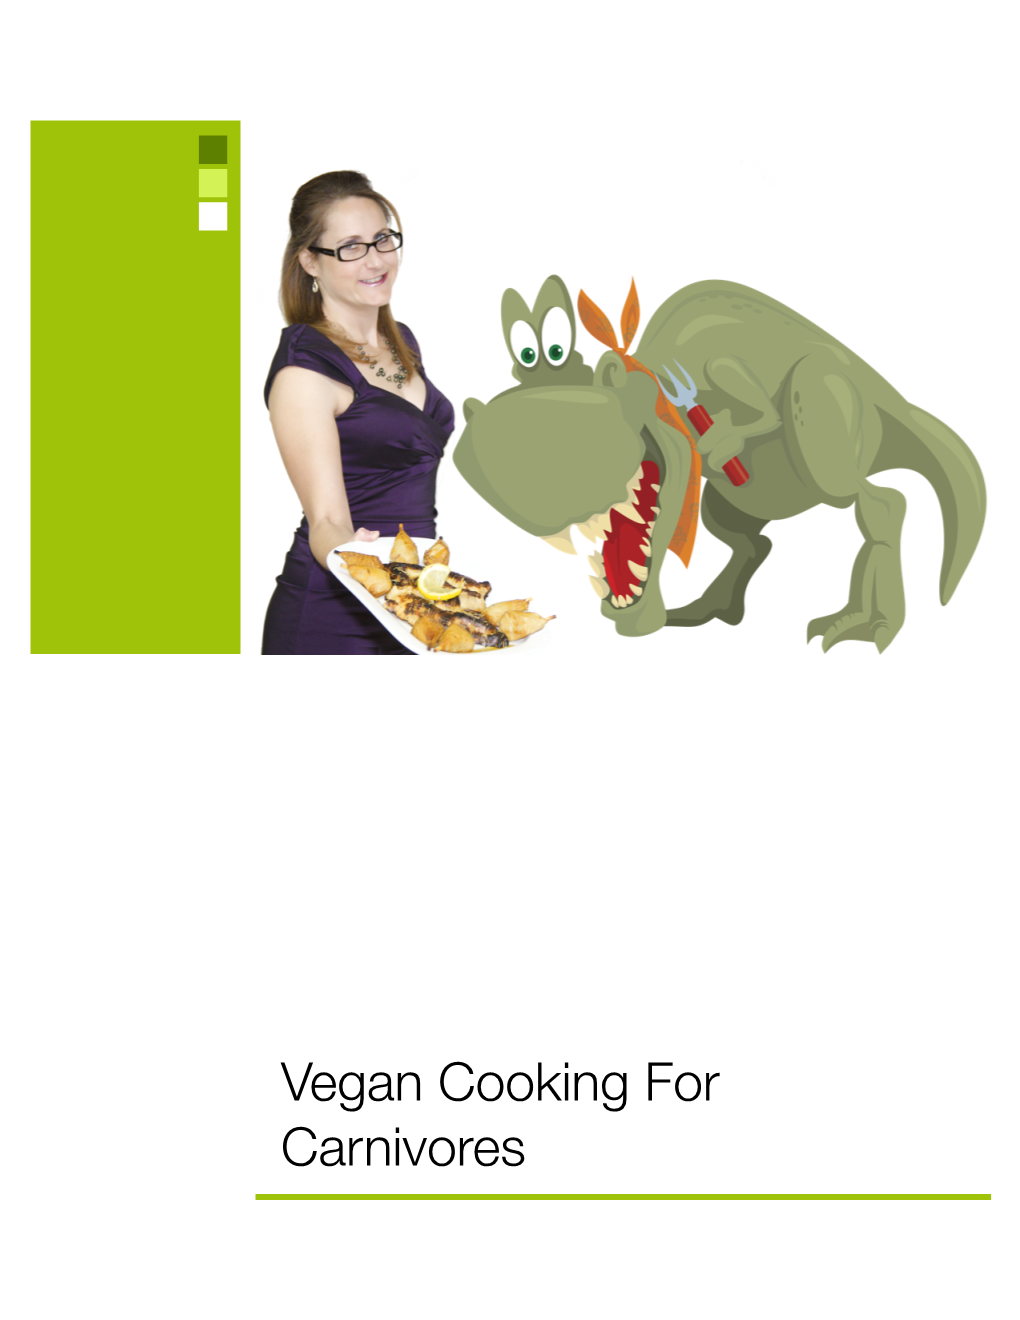 Vegan Cooking for Carnivores Let Me Start Off by Saying That I Am Not a Chef, and I Have Never Been to Cooking School